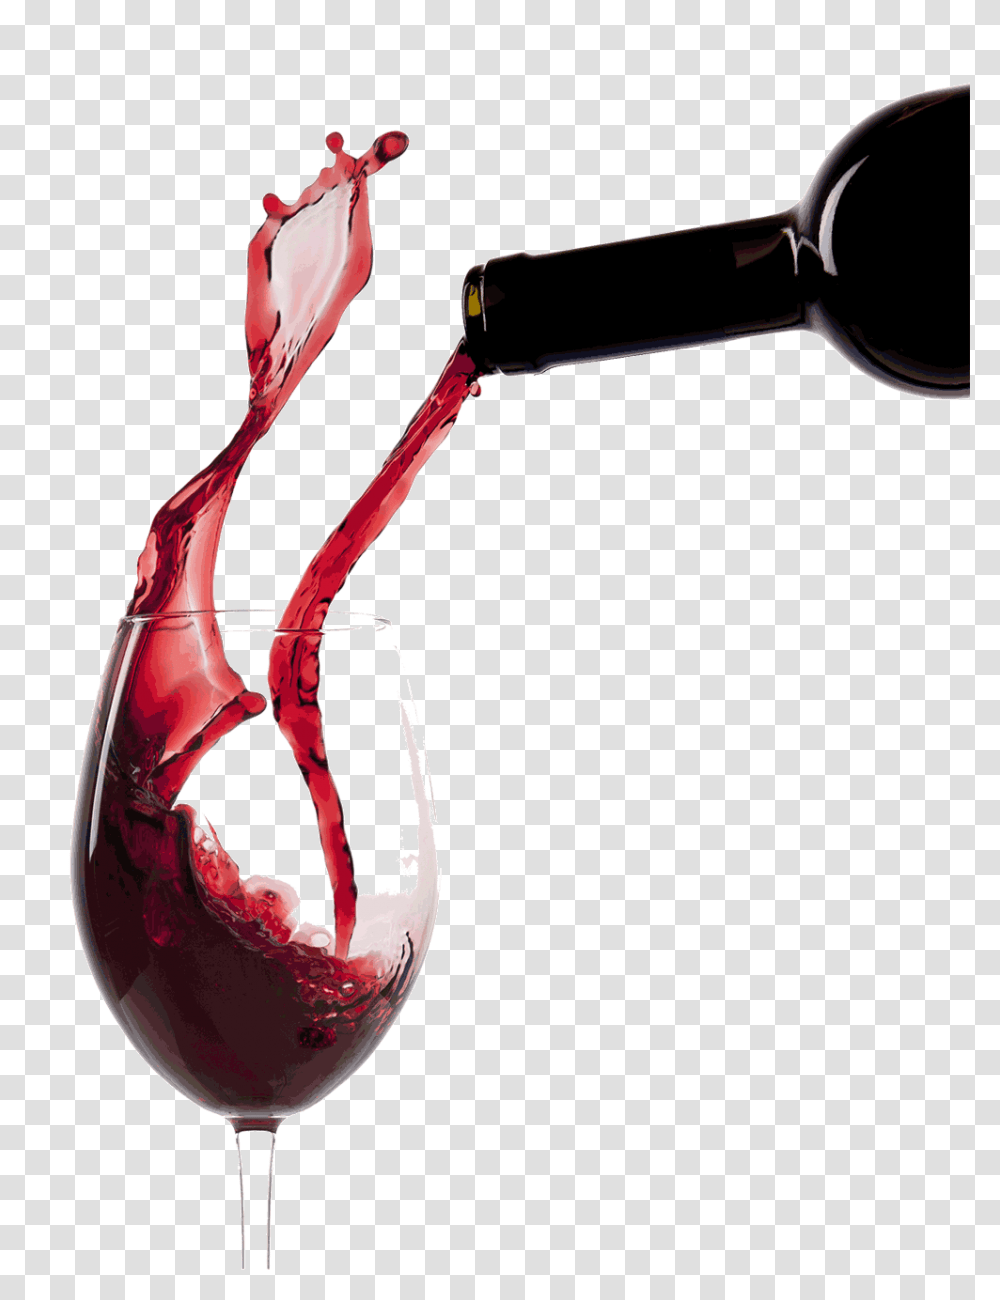 Glass Images Free Wineglass Pictures, Alcohol, Beverage, Drink, Red Wine Transparent Png